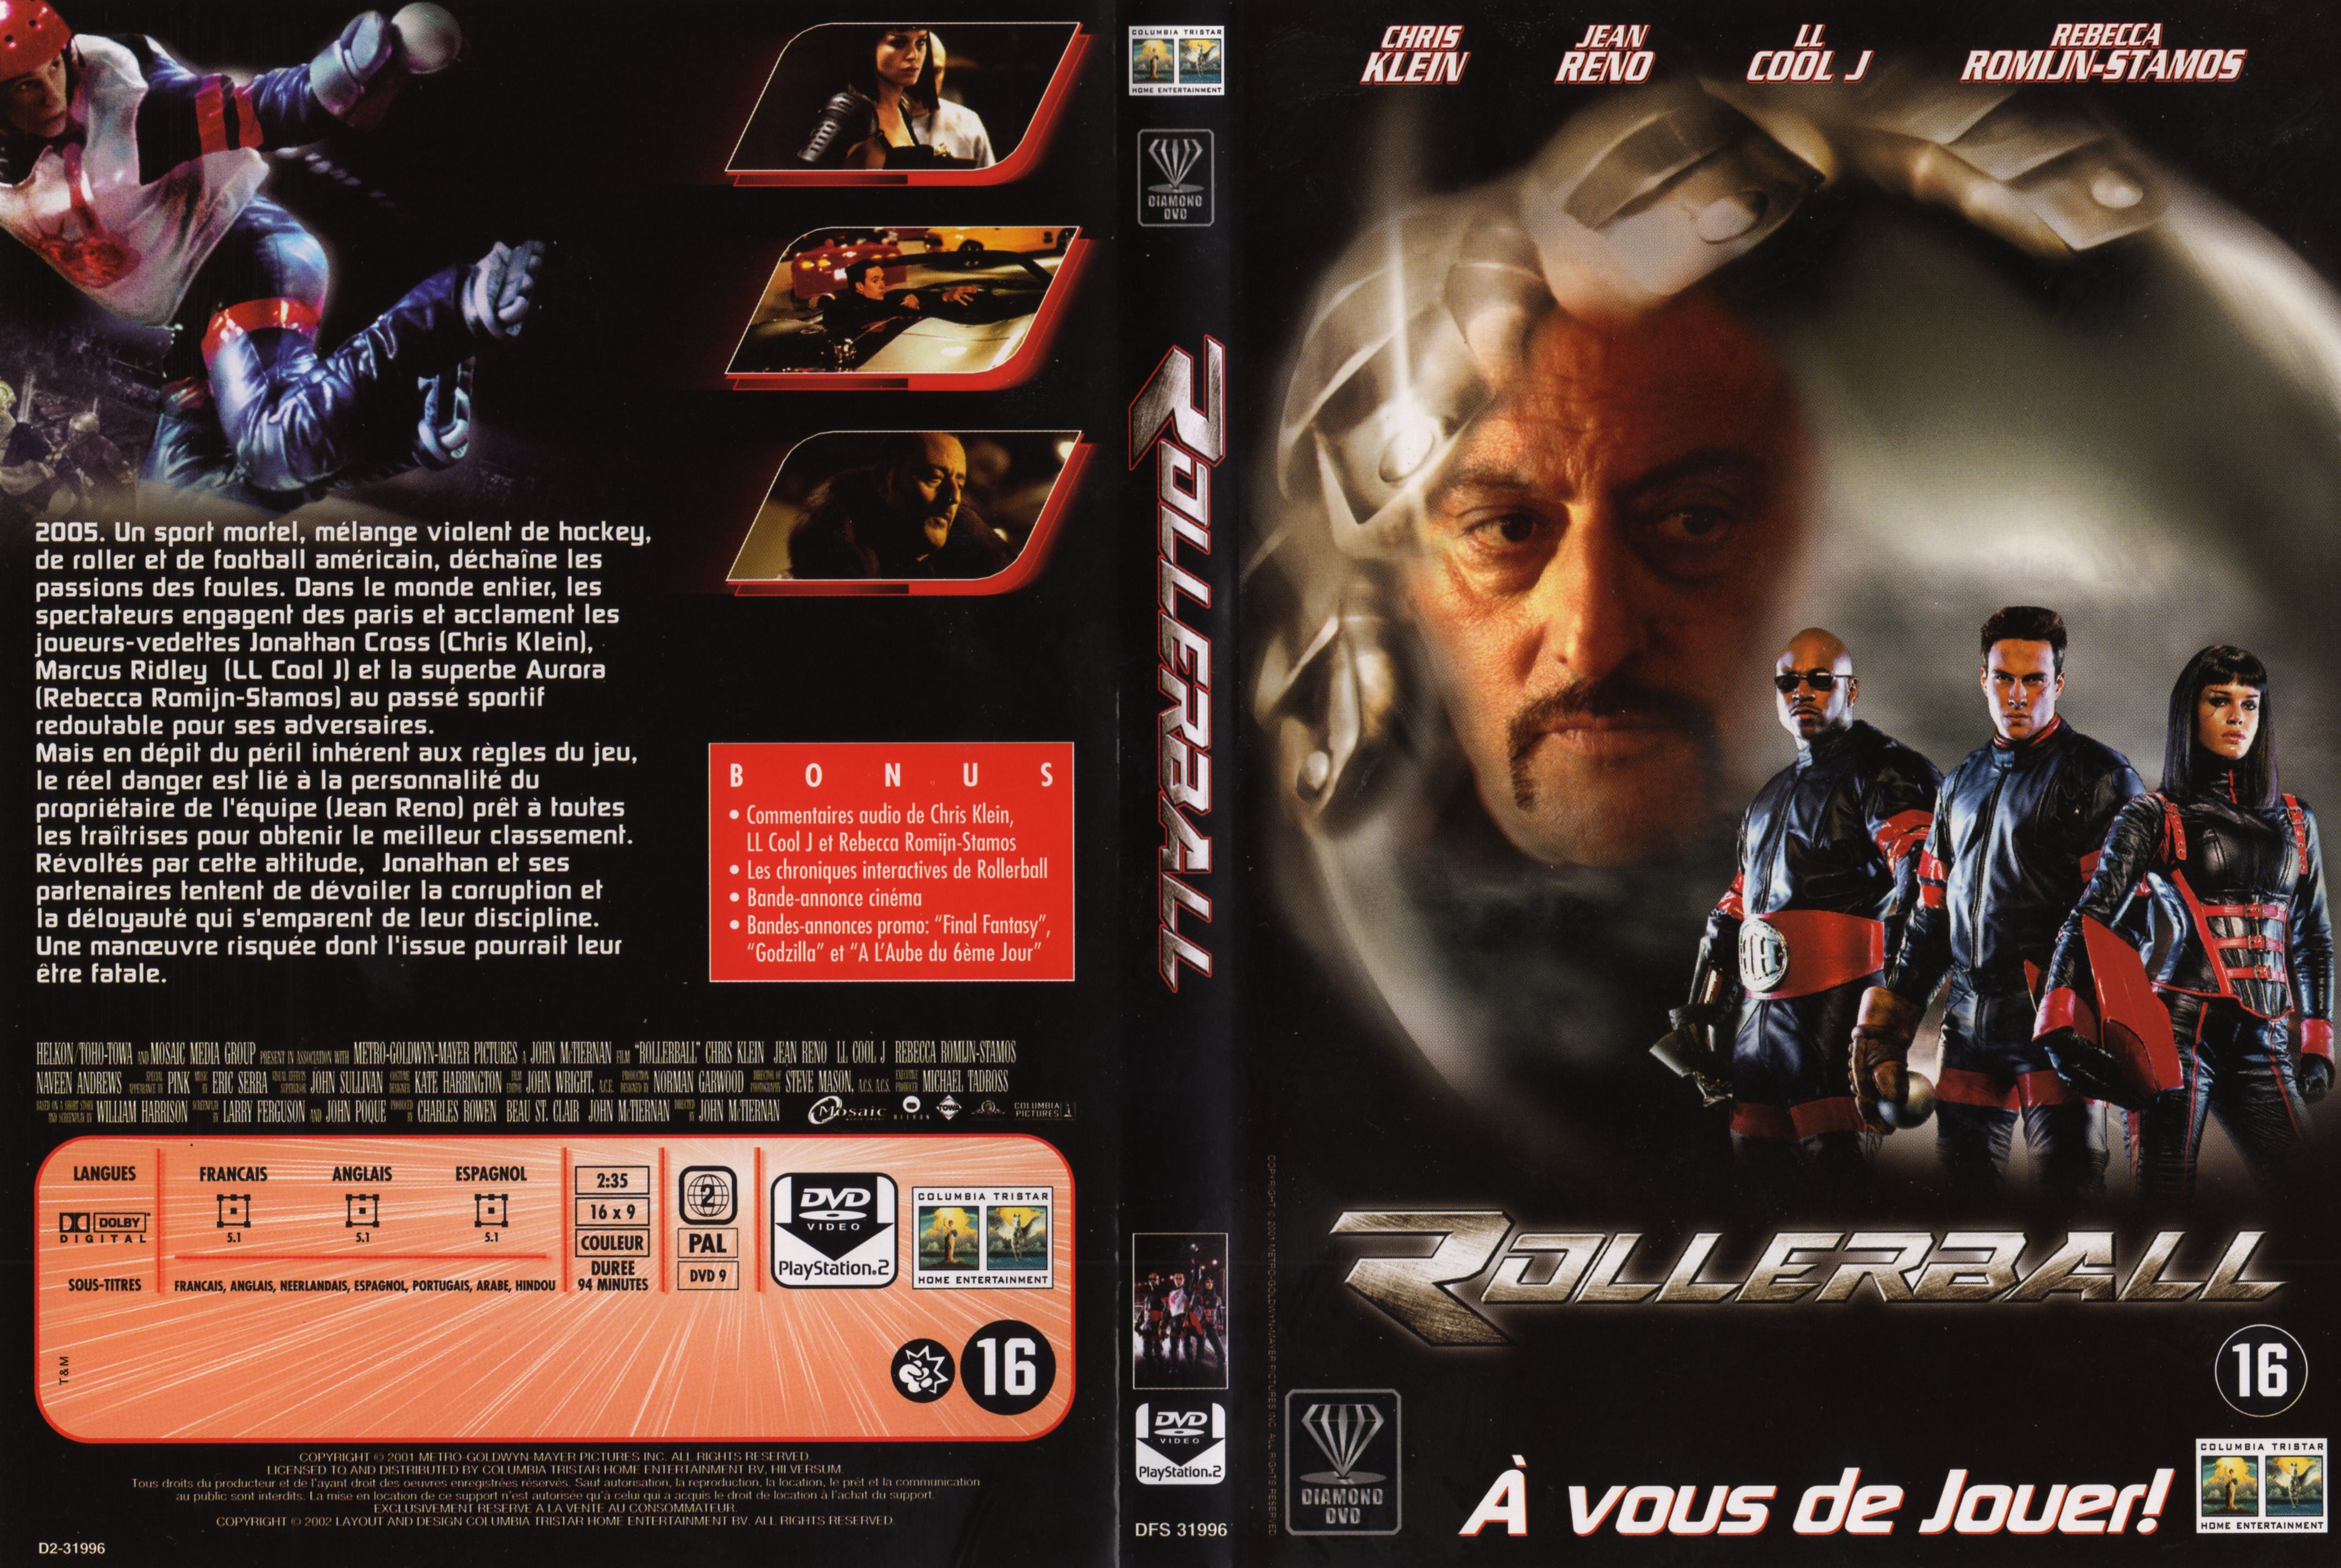 Jaquette DVD Rollerball 2002 v2